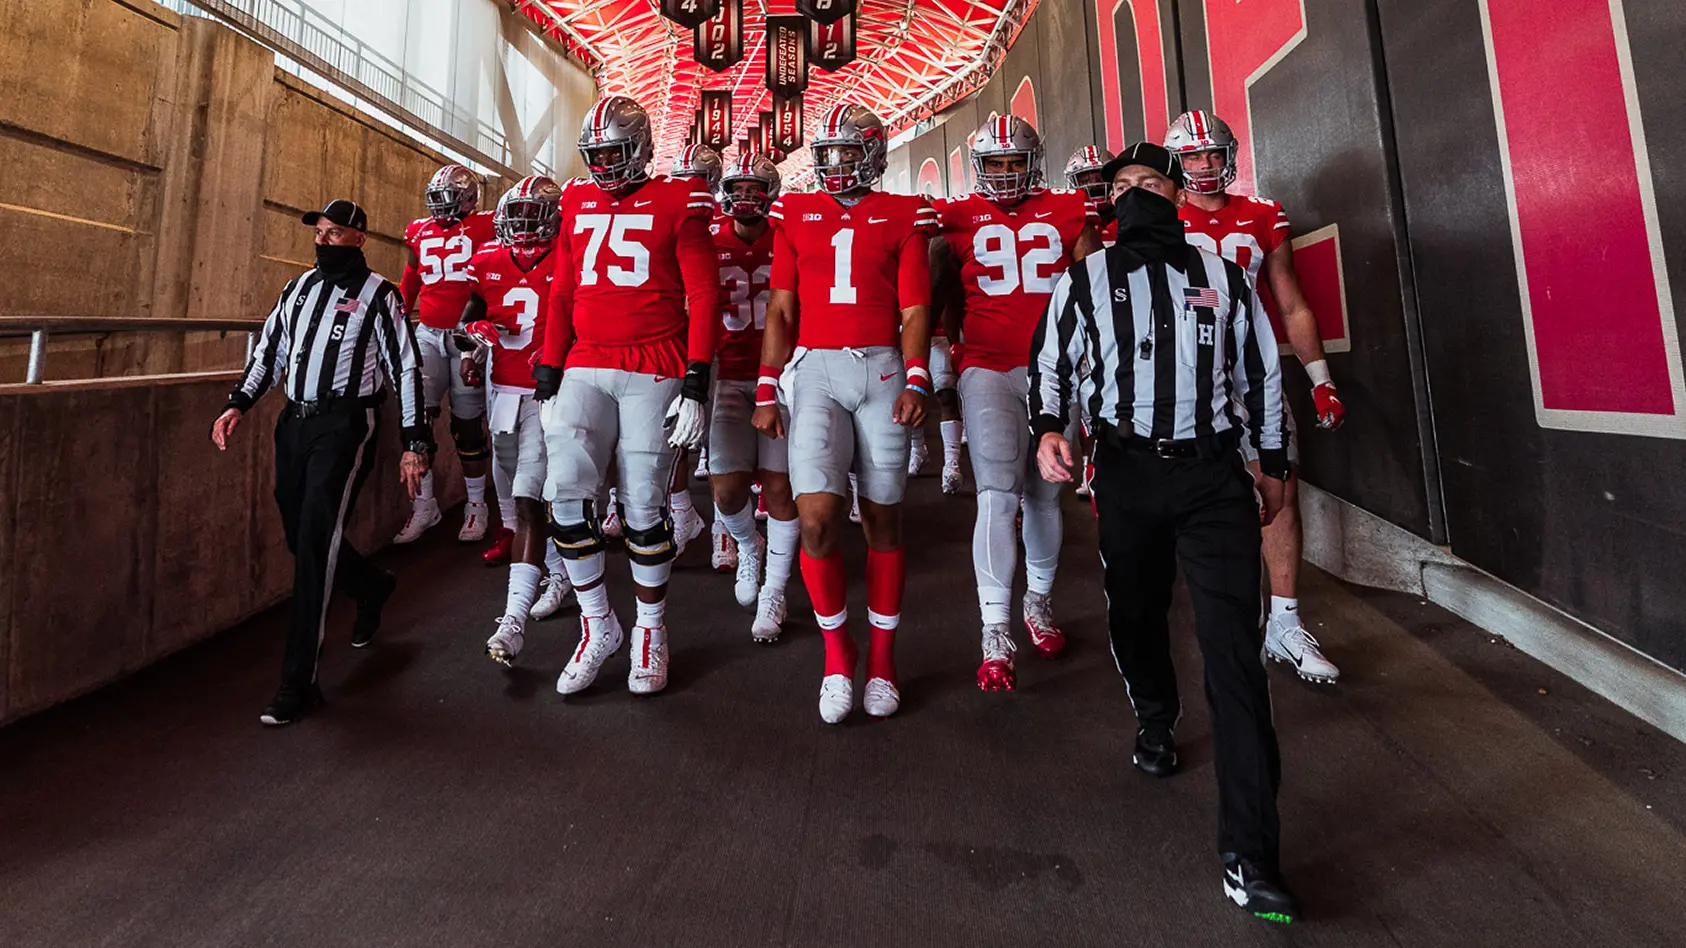 Ohio State players in uniform walk down tunnel led by refereees